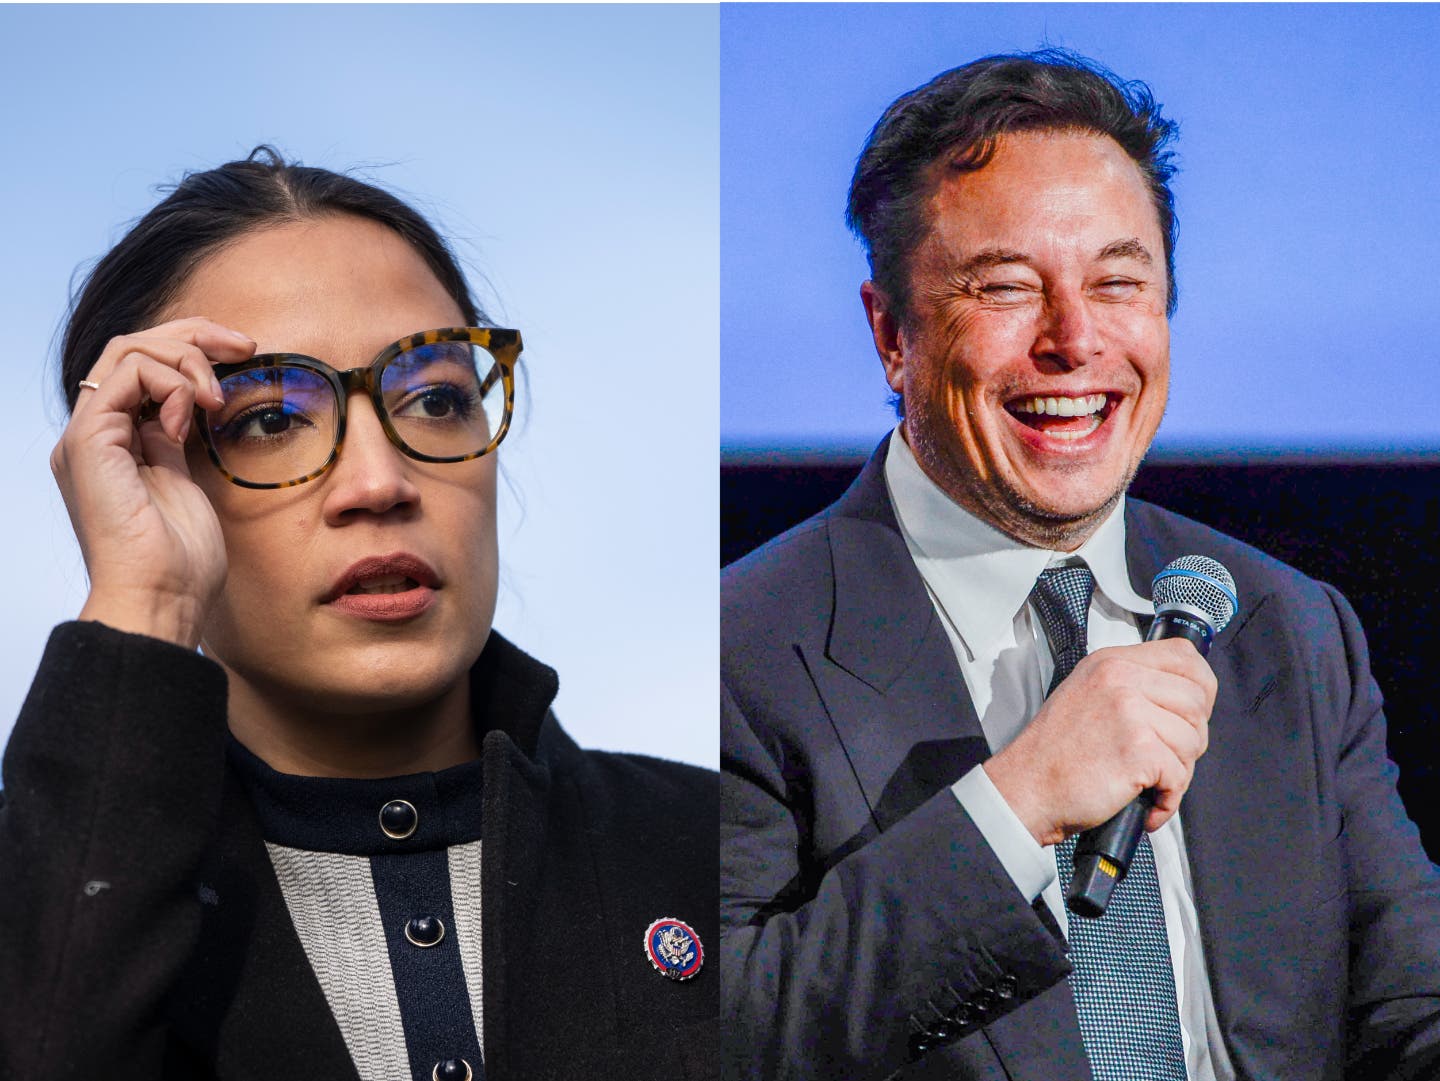 AOC warns Elon Musk is ‘testing waters’ to interfere in 2024 election